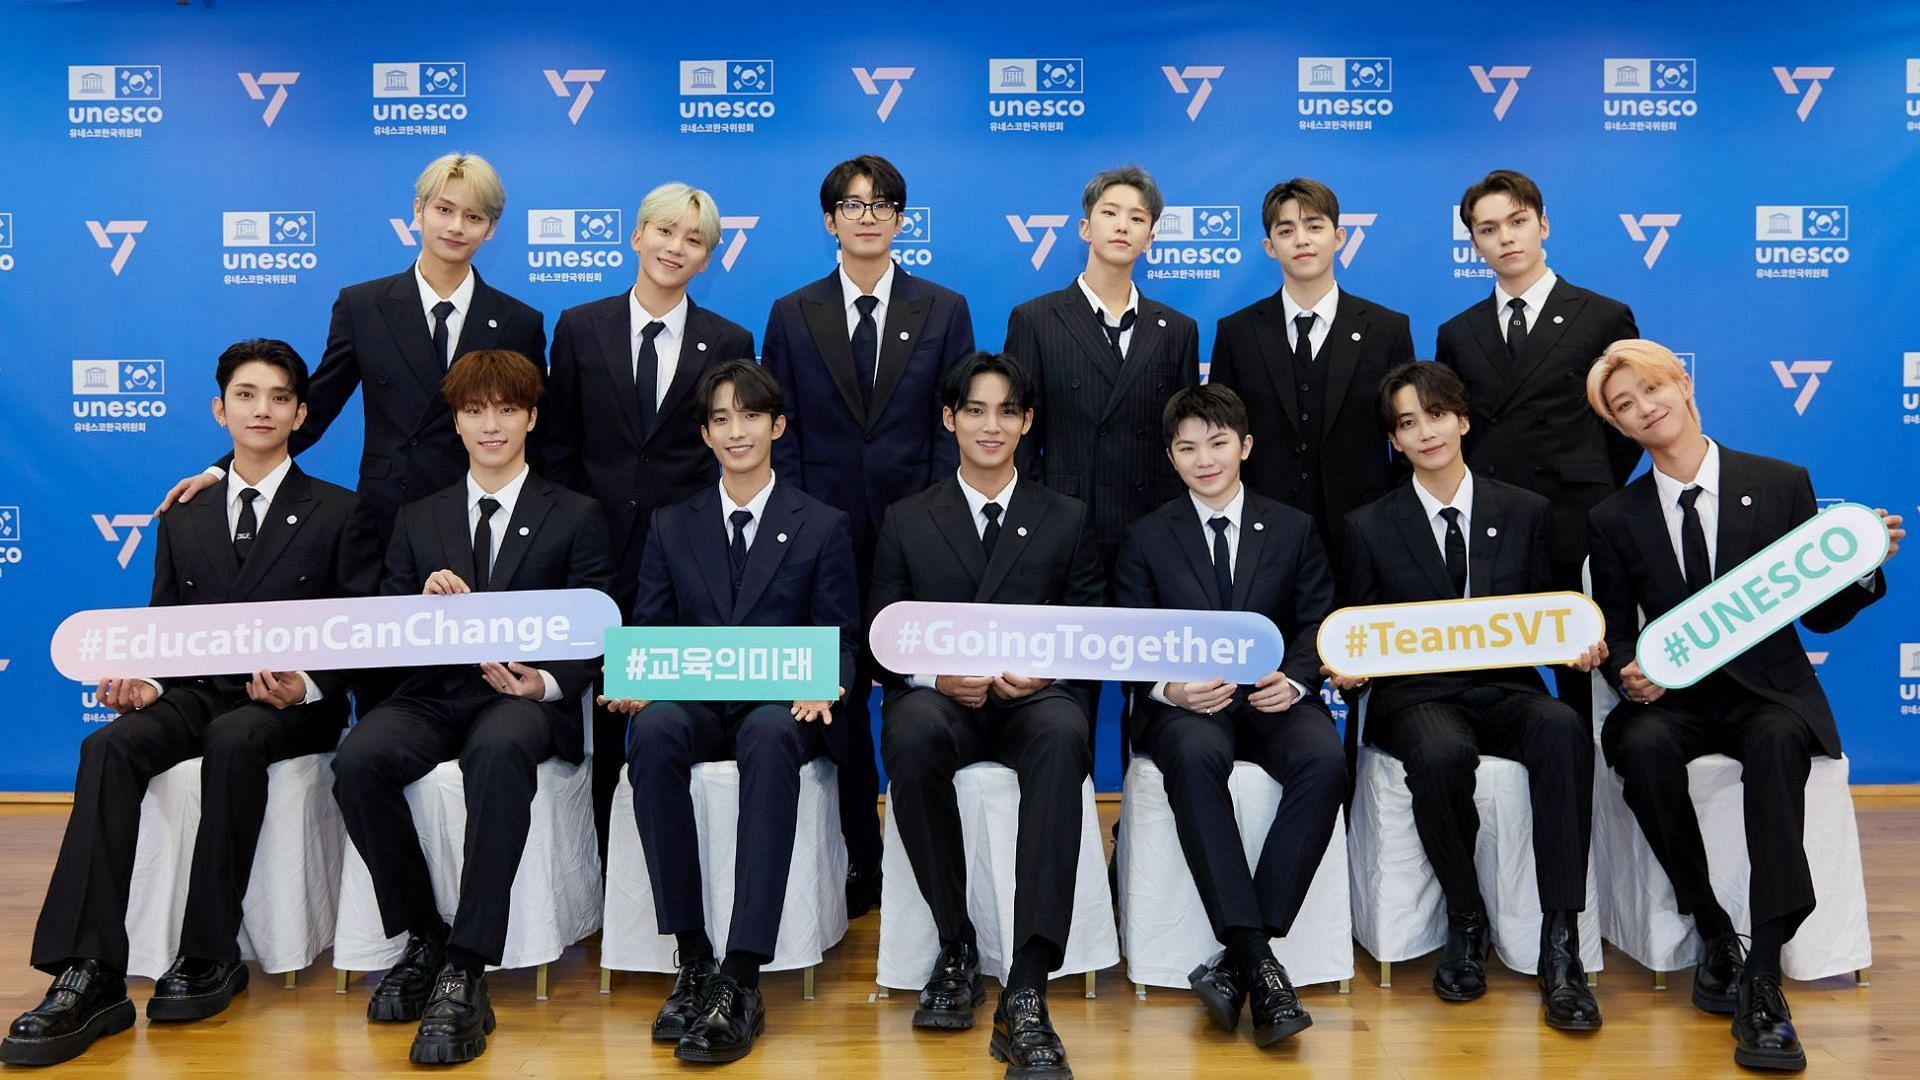 SEVENTEEN launch a global campaign titled Going Together with UNESCO Korea (Image via PLEDIS Entertainment)